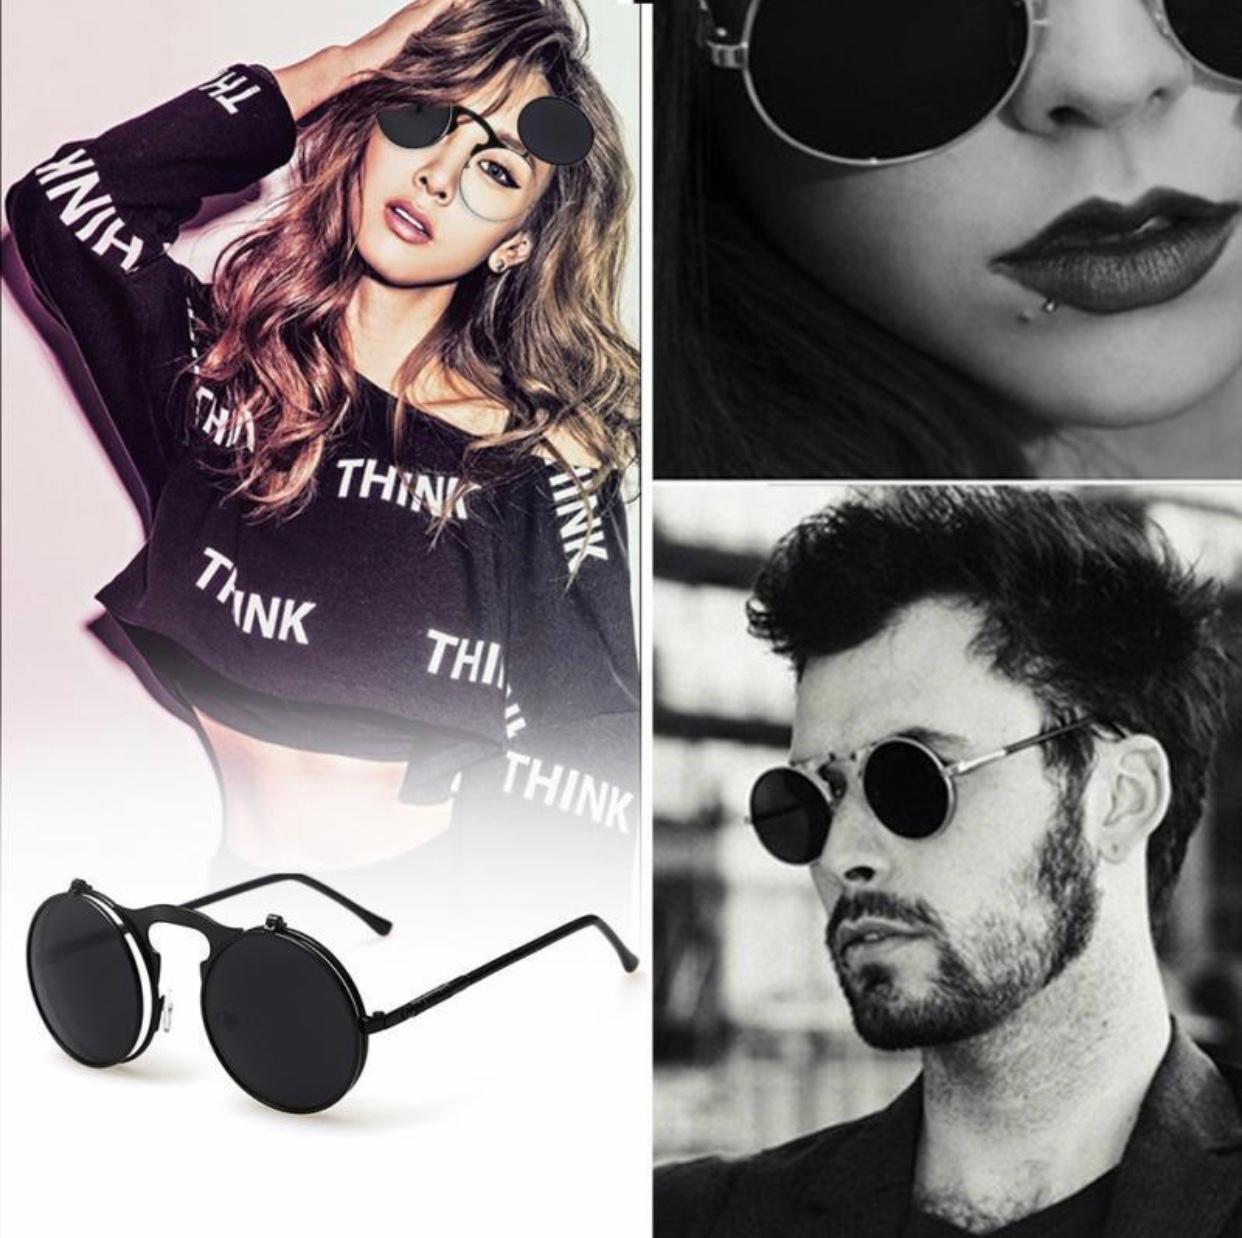 Flip Circular Double Metal Sunglasses For Men And Women-Unique and Classy